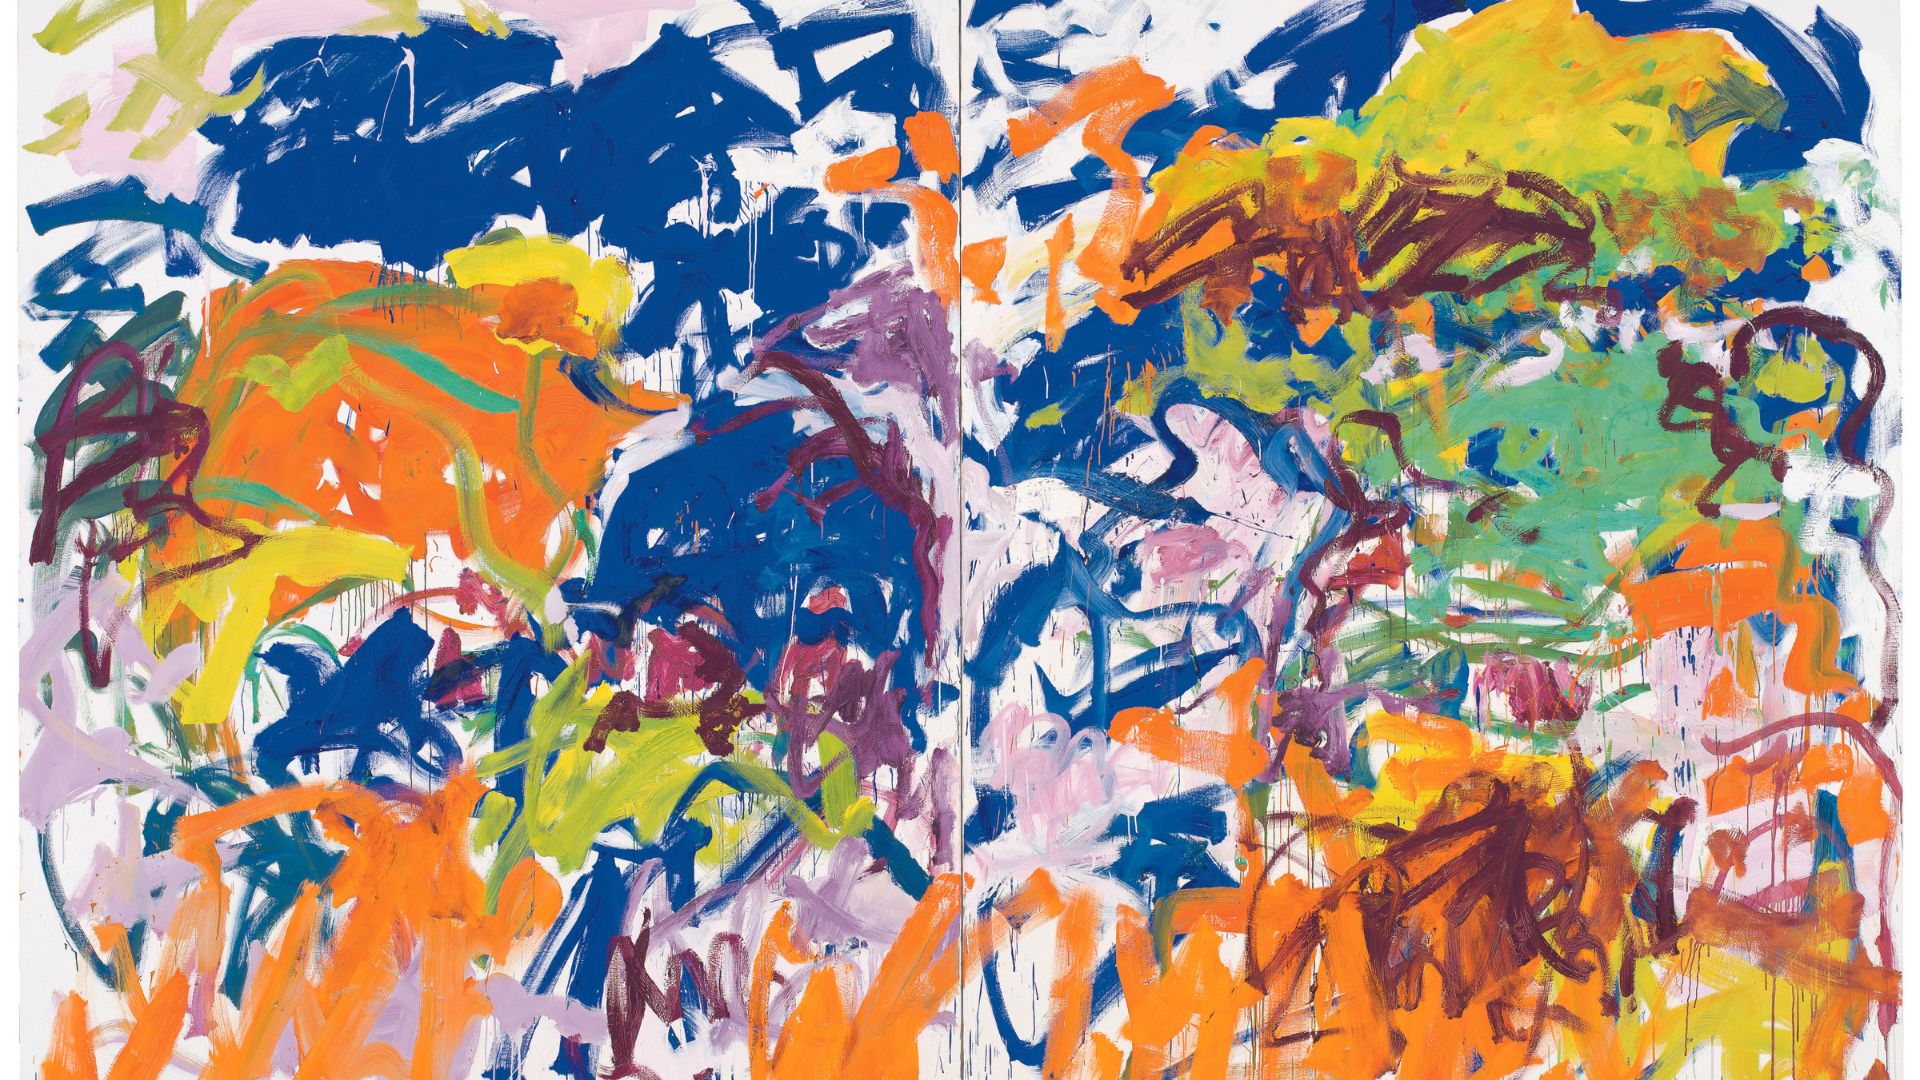 Ici by Joan Mitchell is on view at the Saint Louis Art Museum.